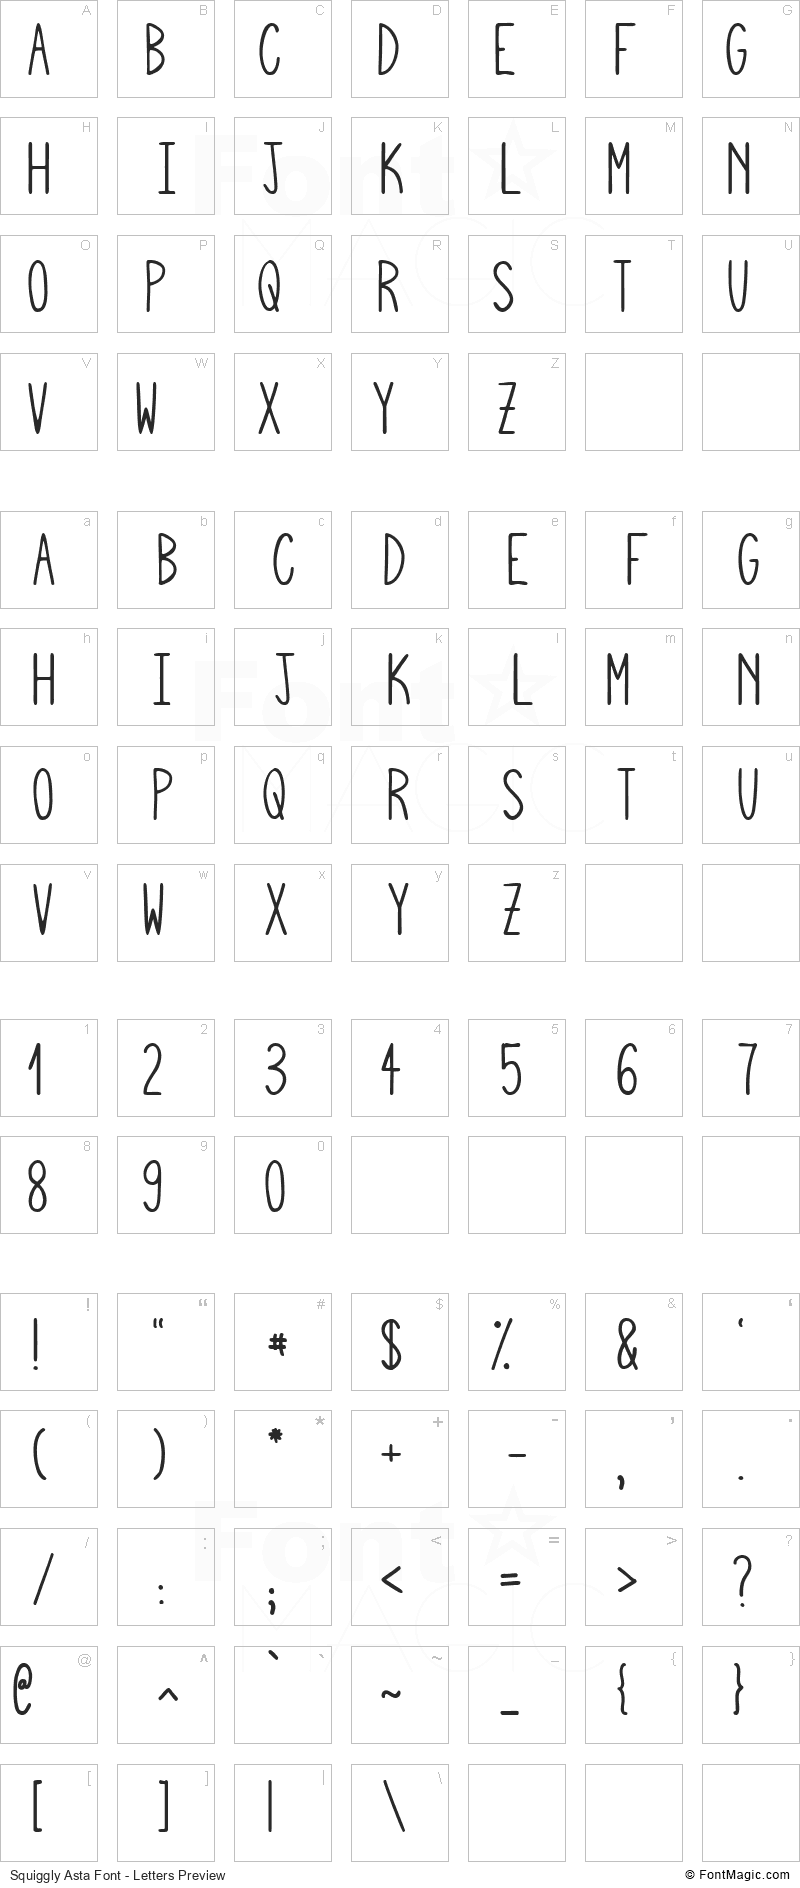 Squiggly Asta Font - All Latters Preview Chart